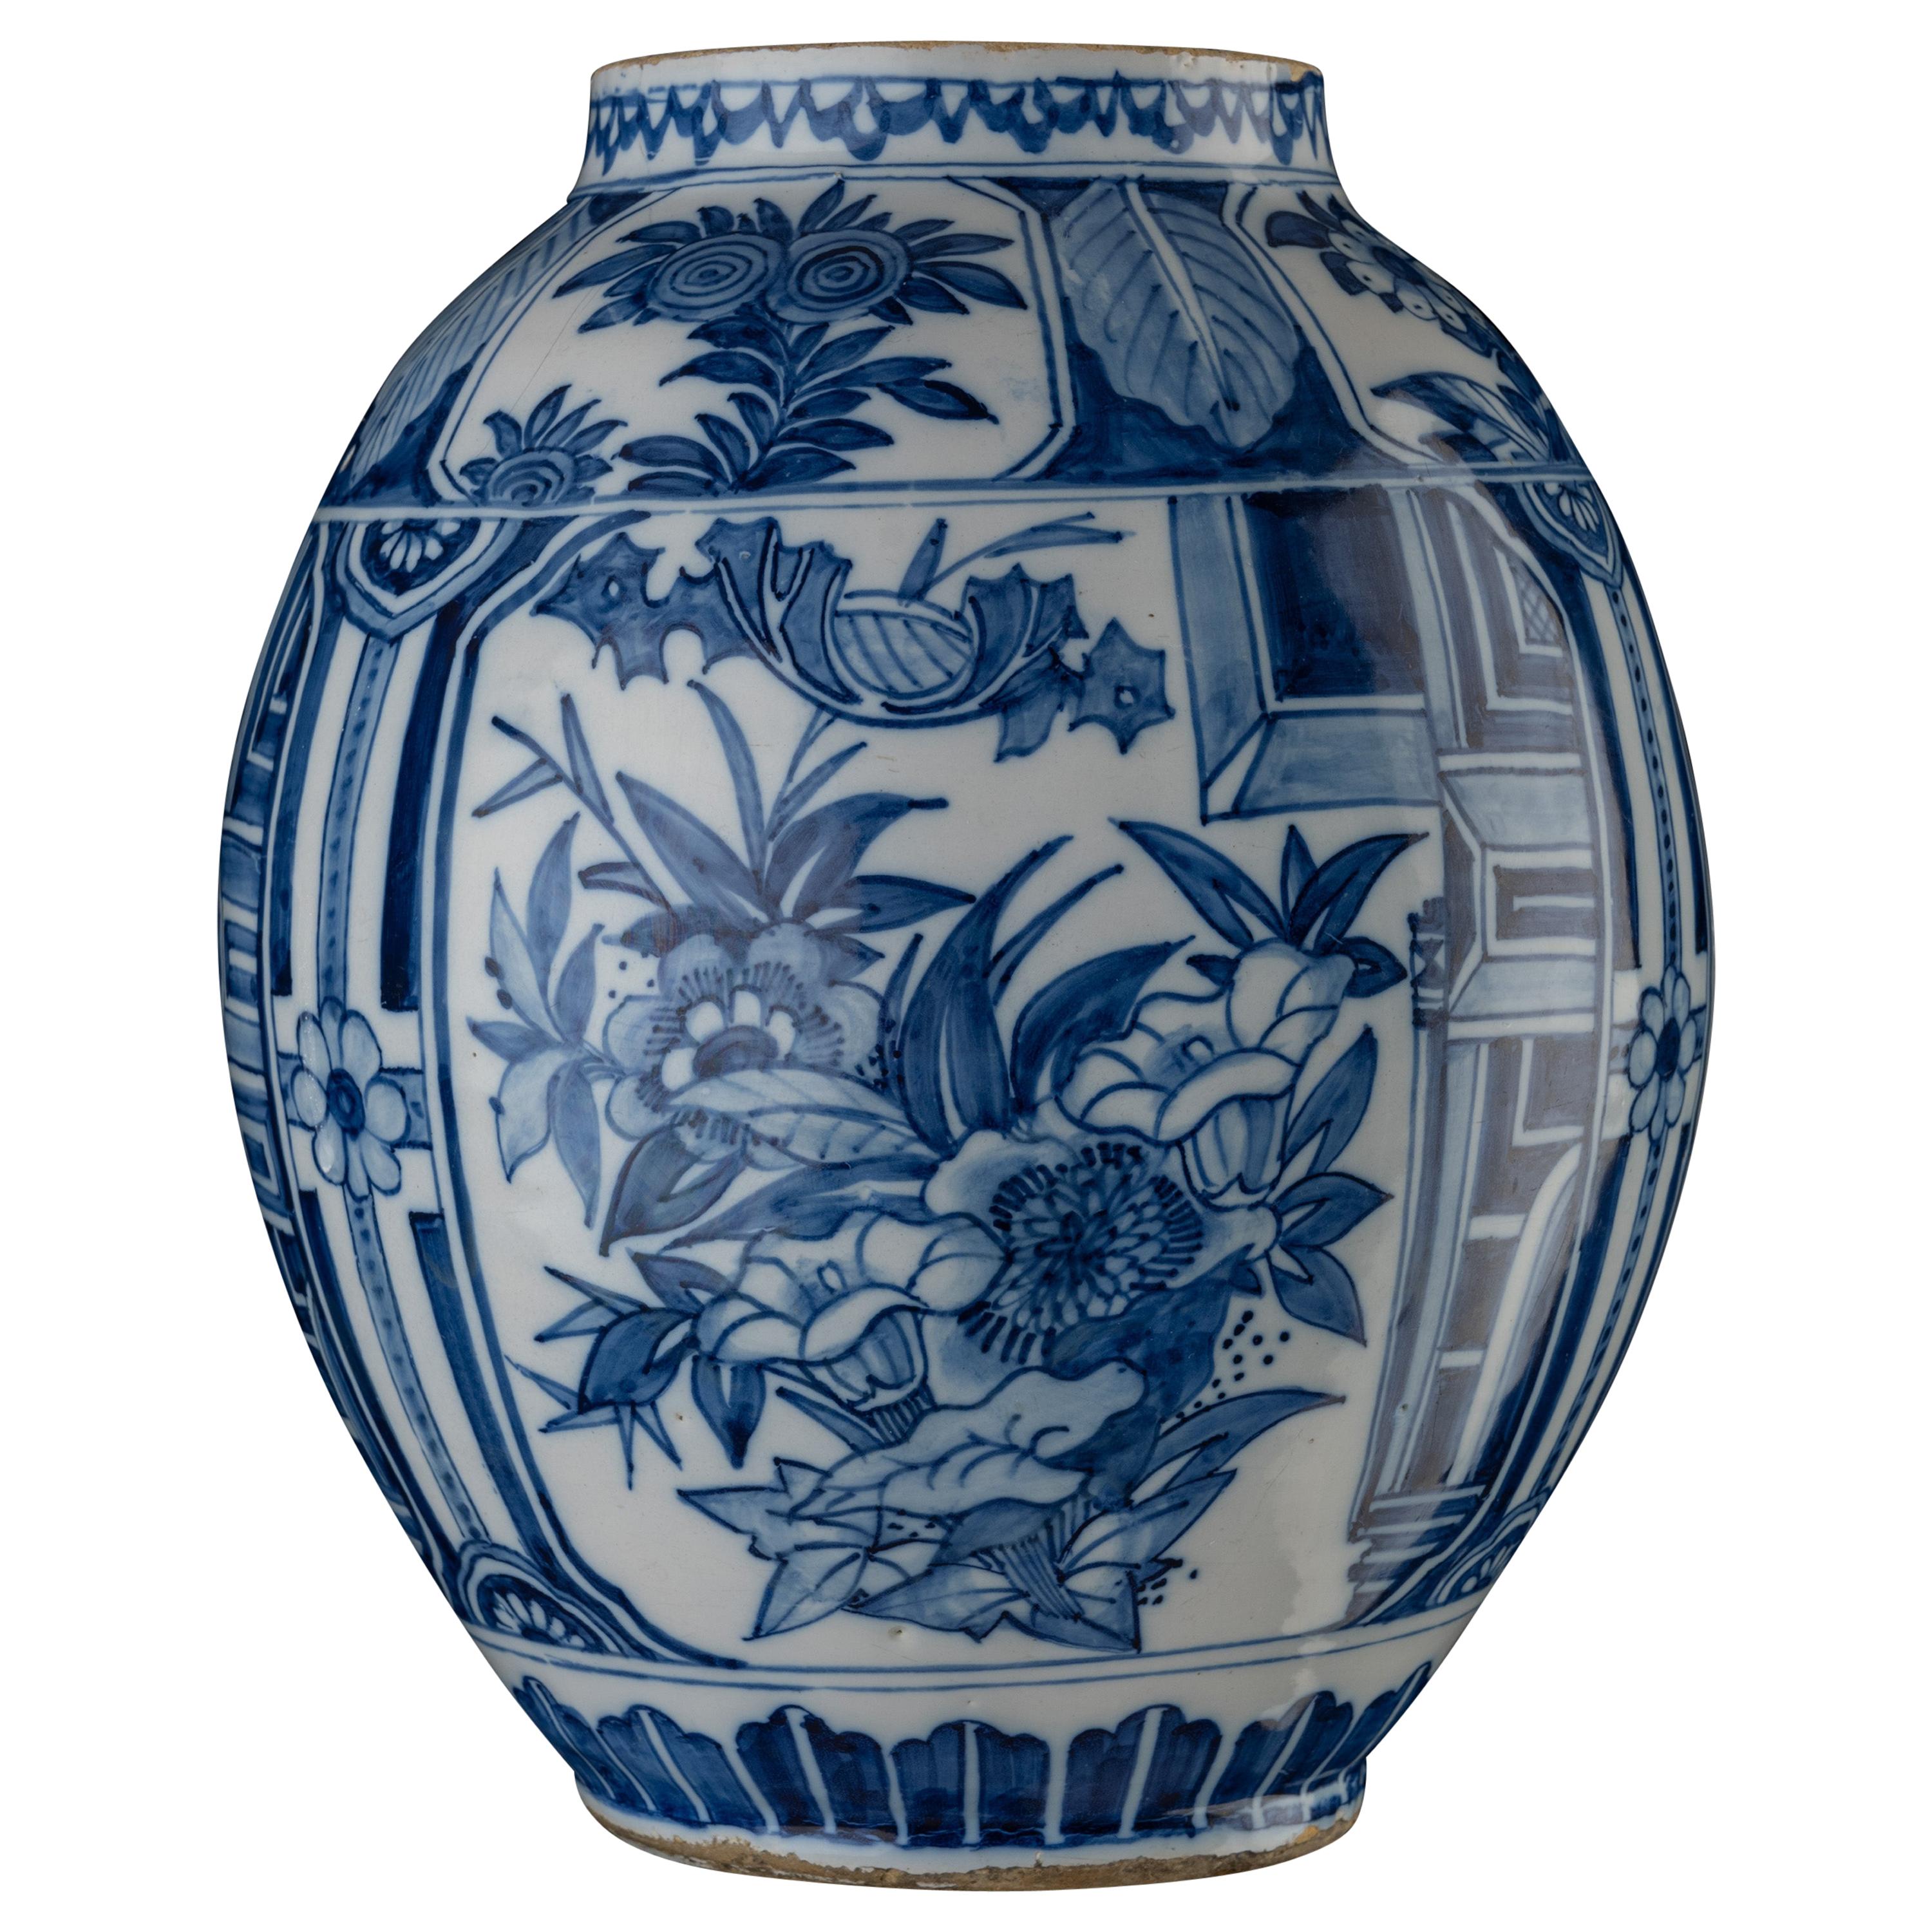 Delft, Blue and White floral Chinoiserie Jar, 1650-1680